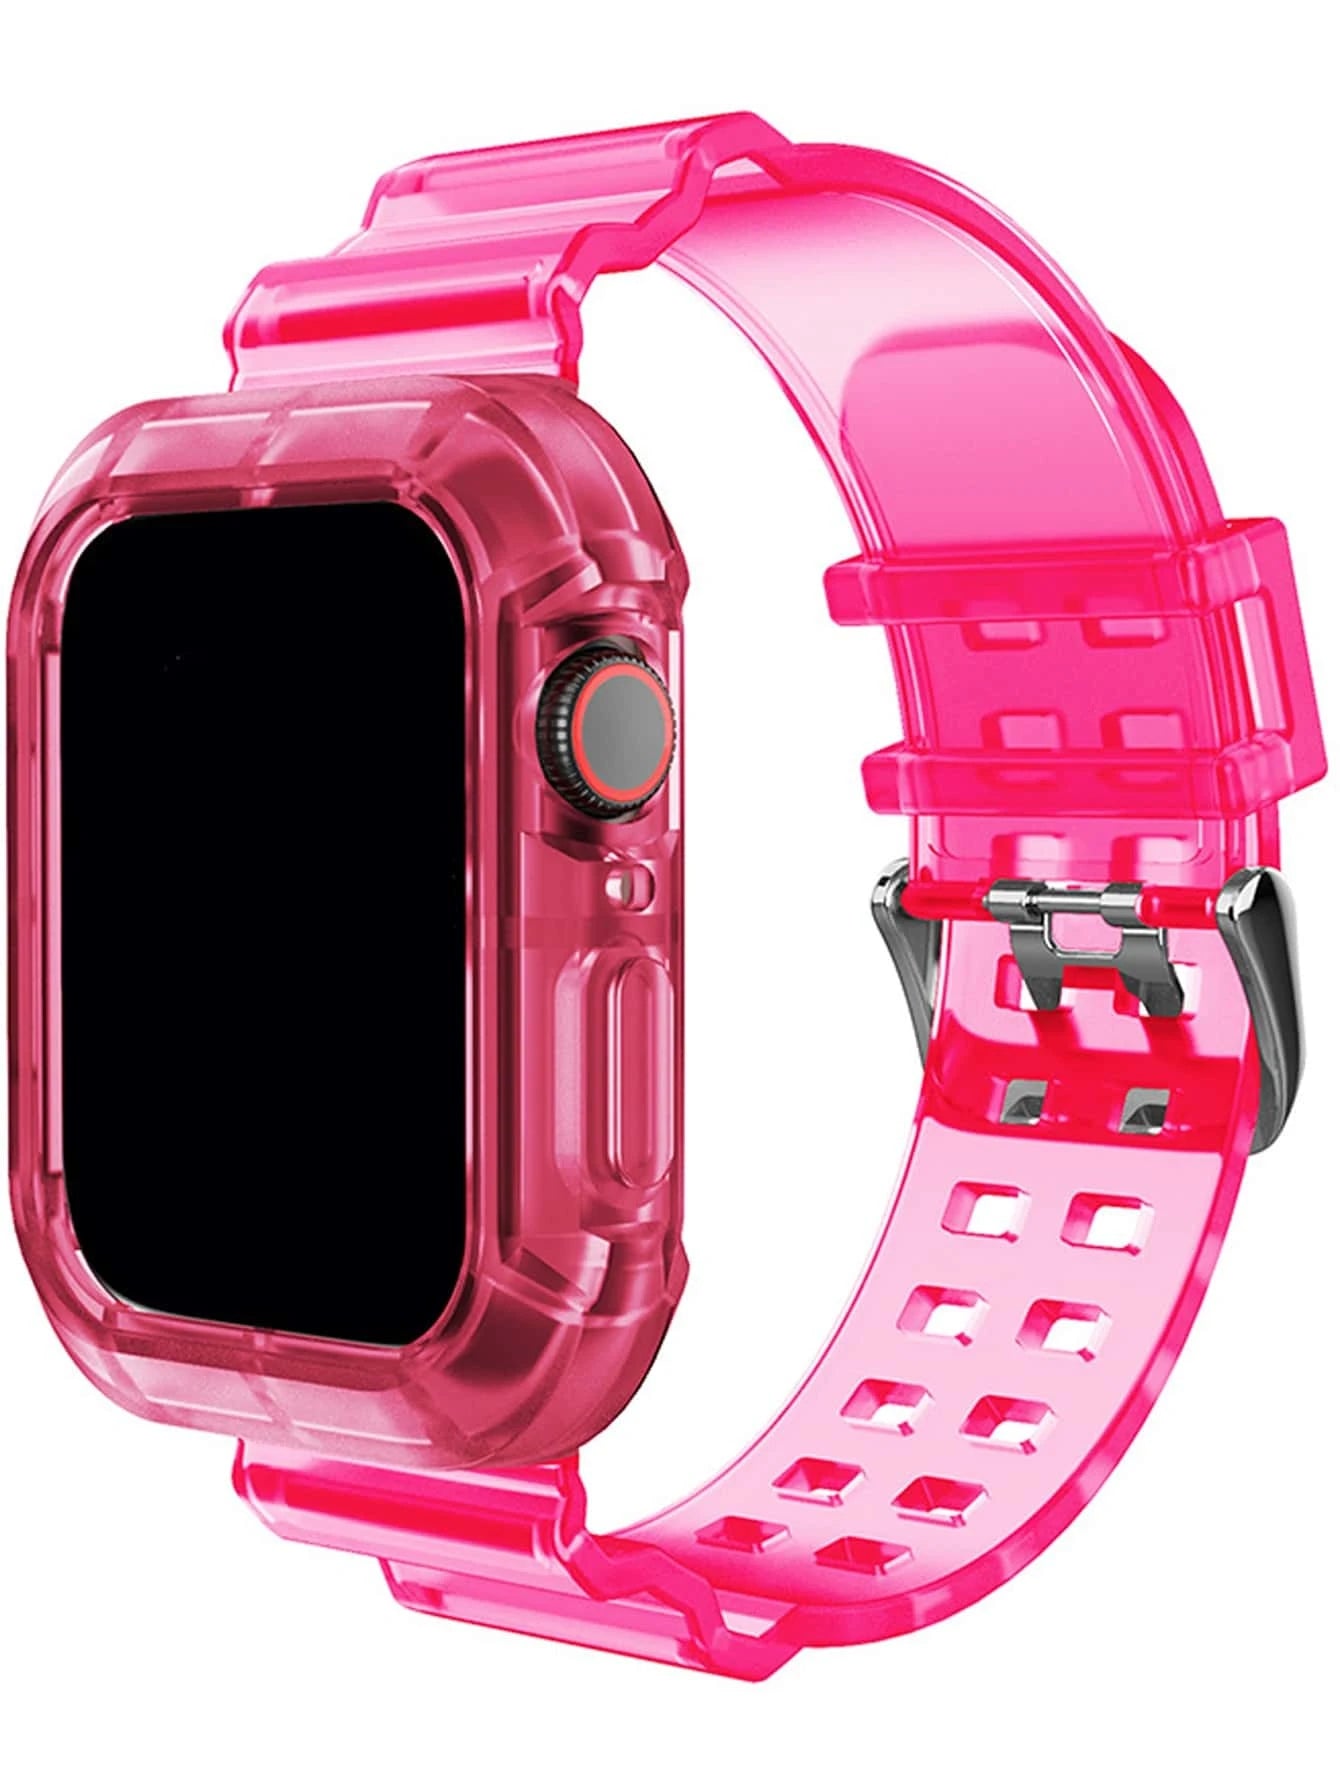 Clear Apple Watch Buckle Style Band with Built in Case